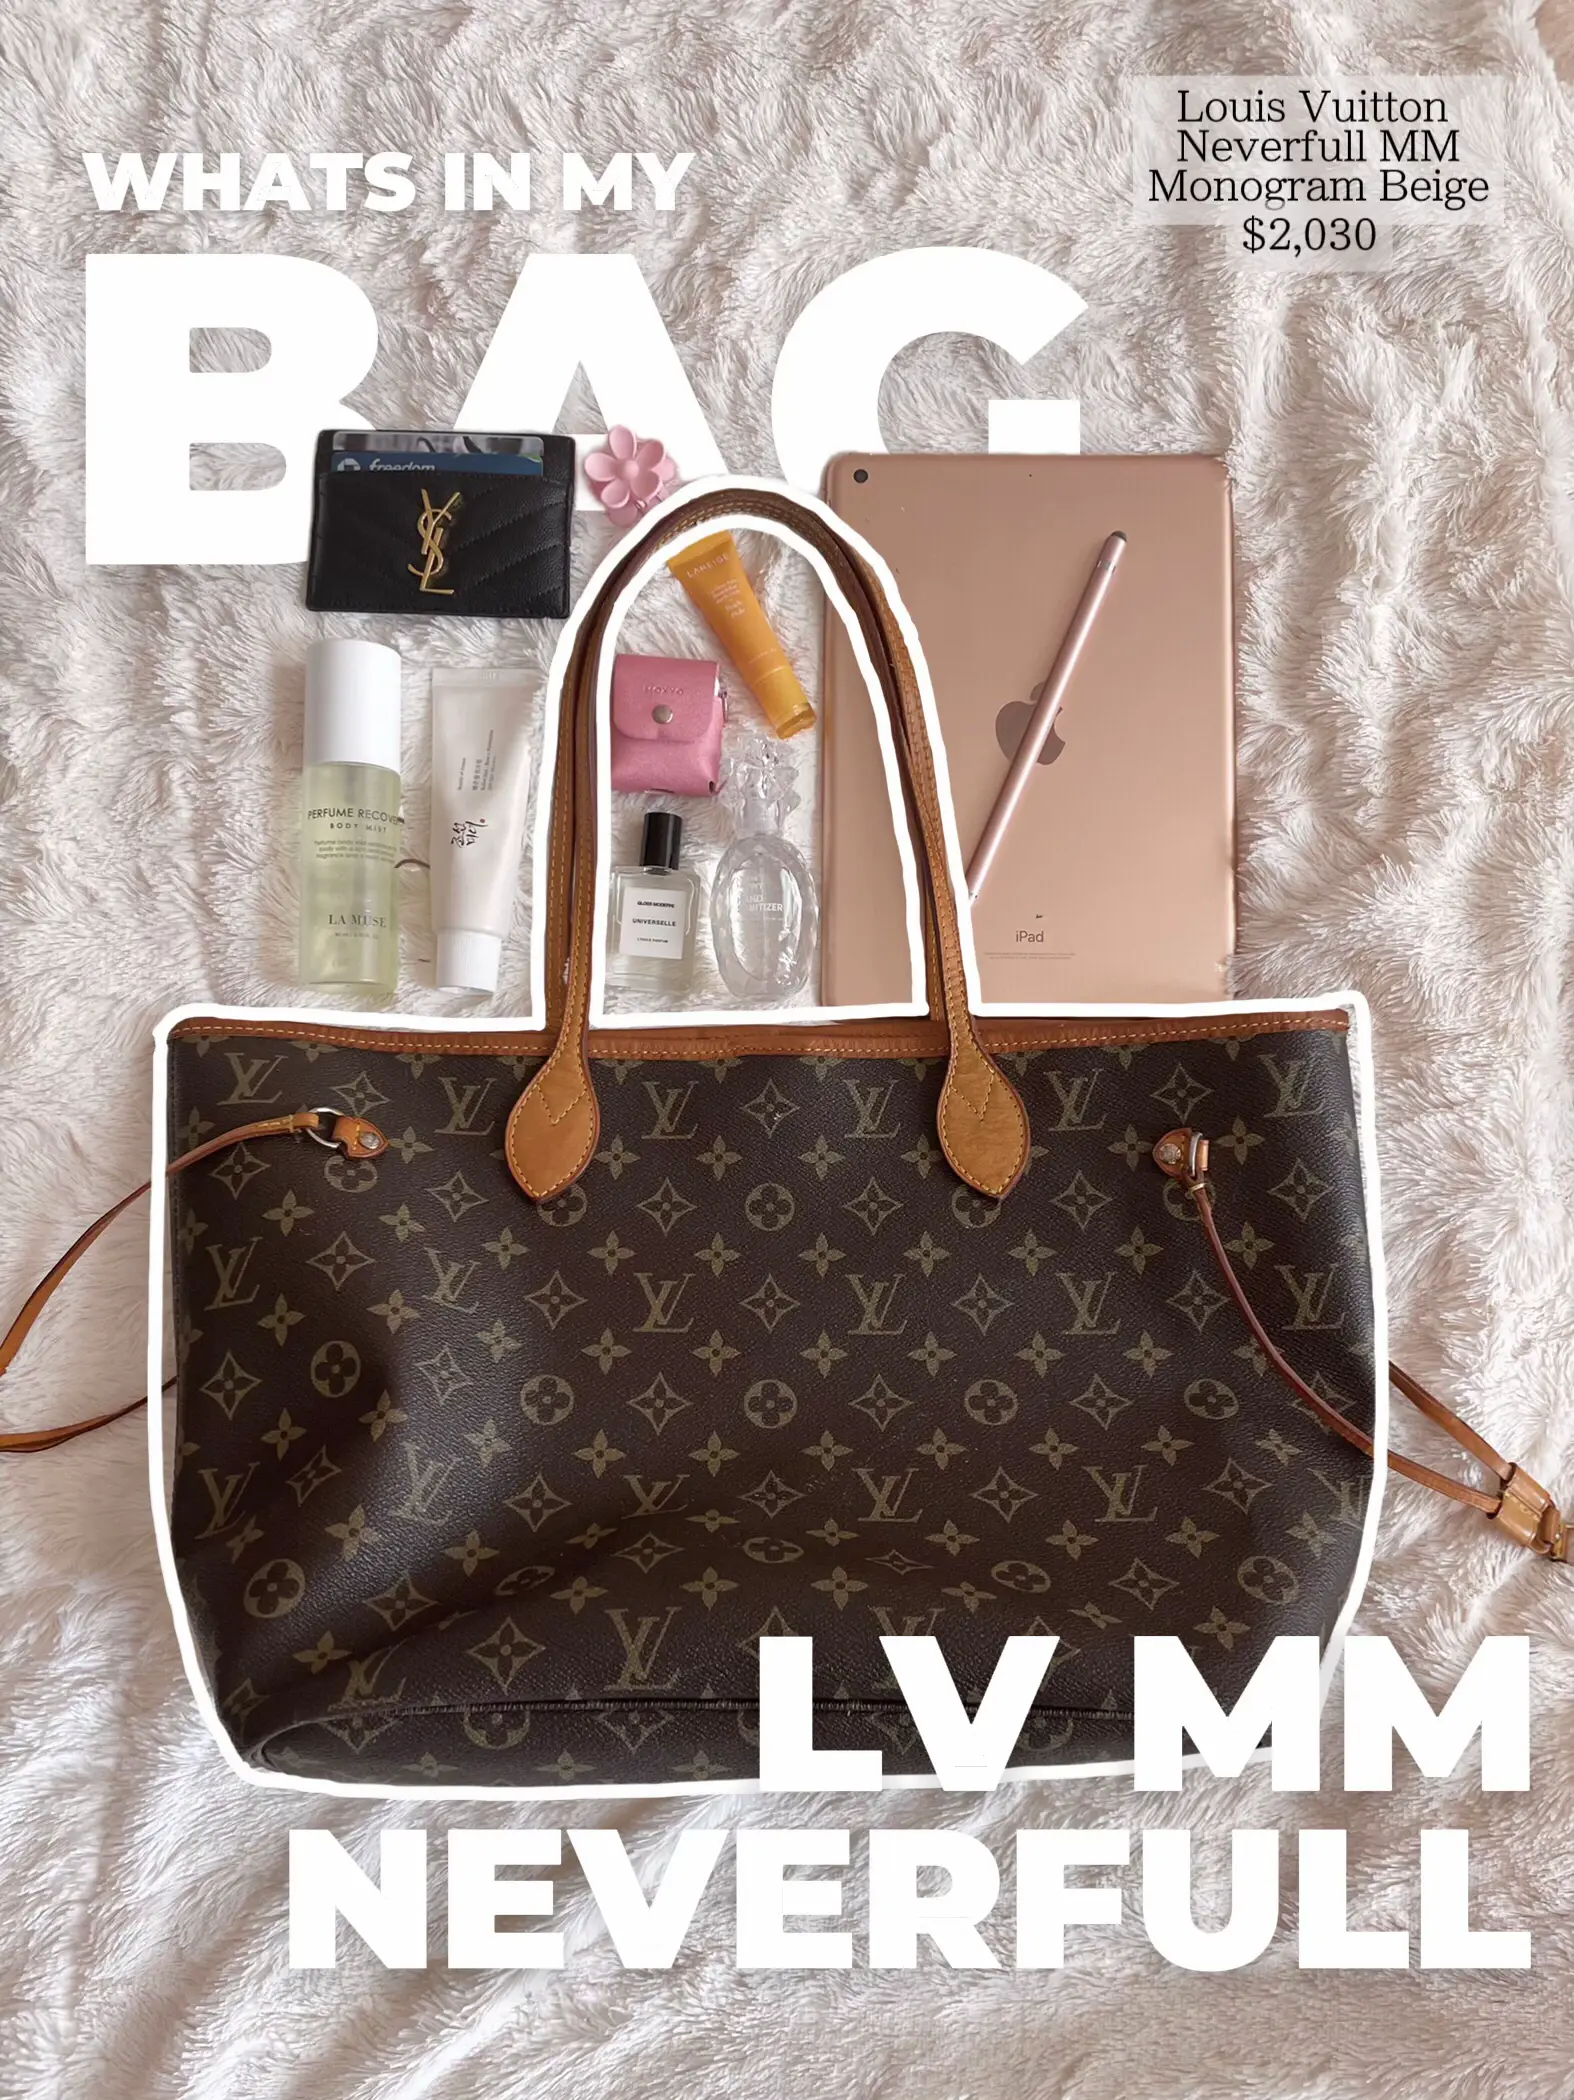 These four #louisvuitton bags sold in less than three days! Louis